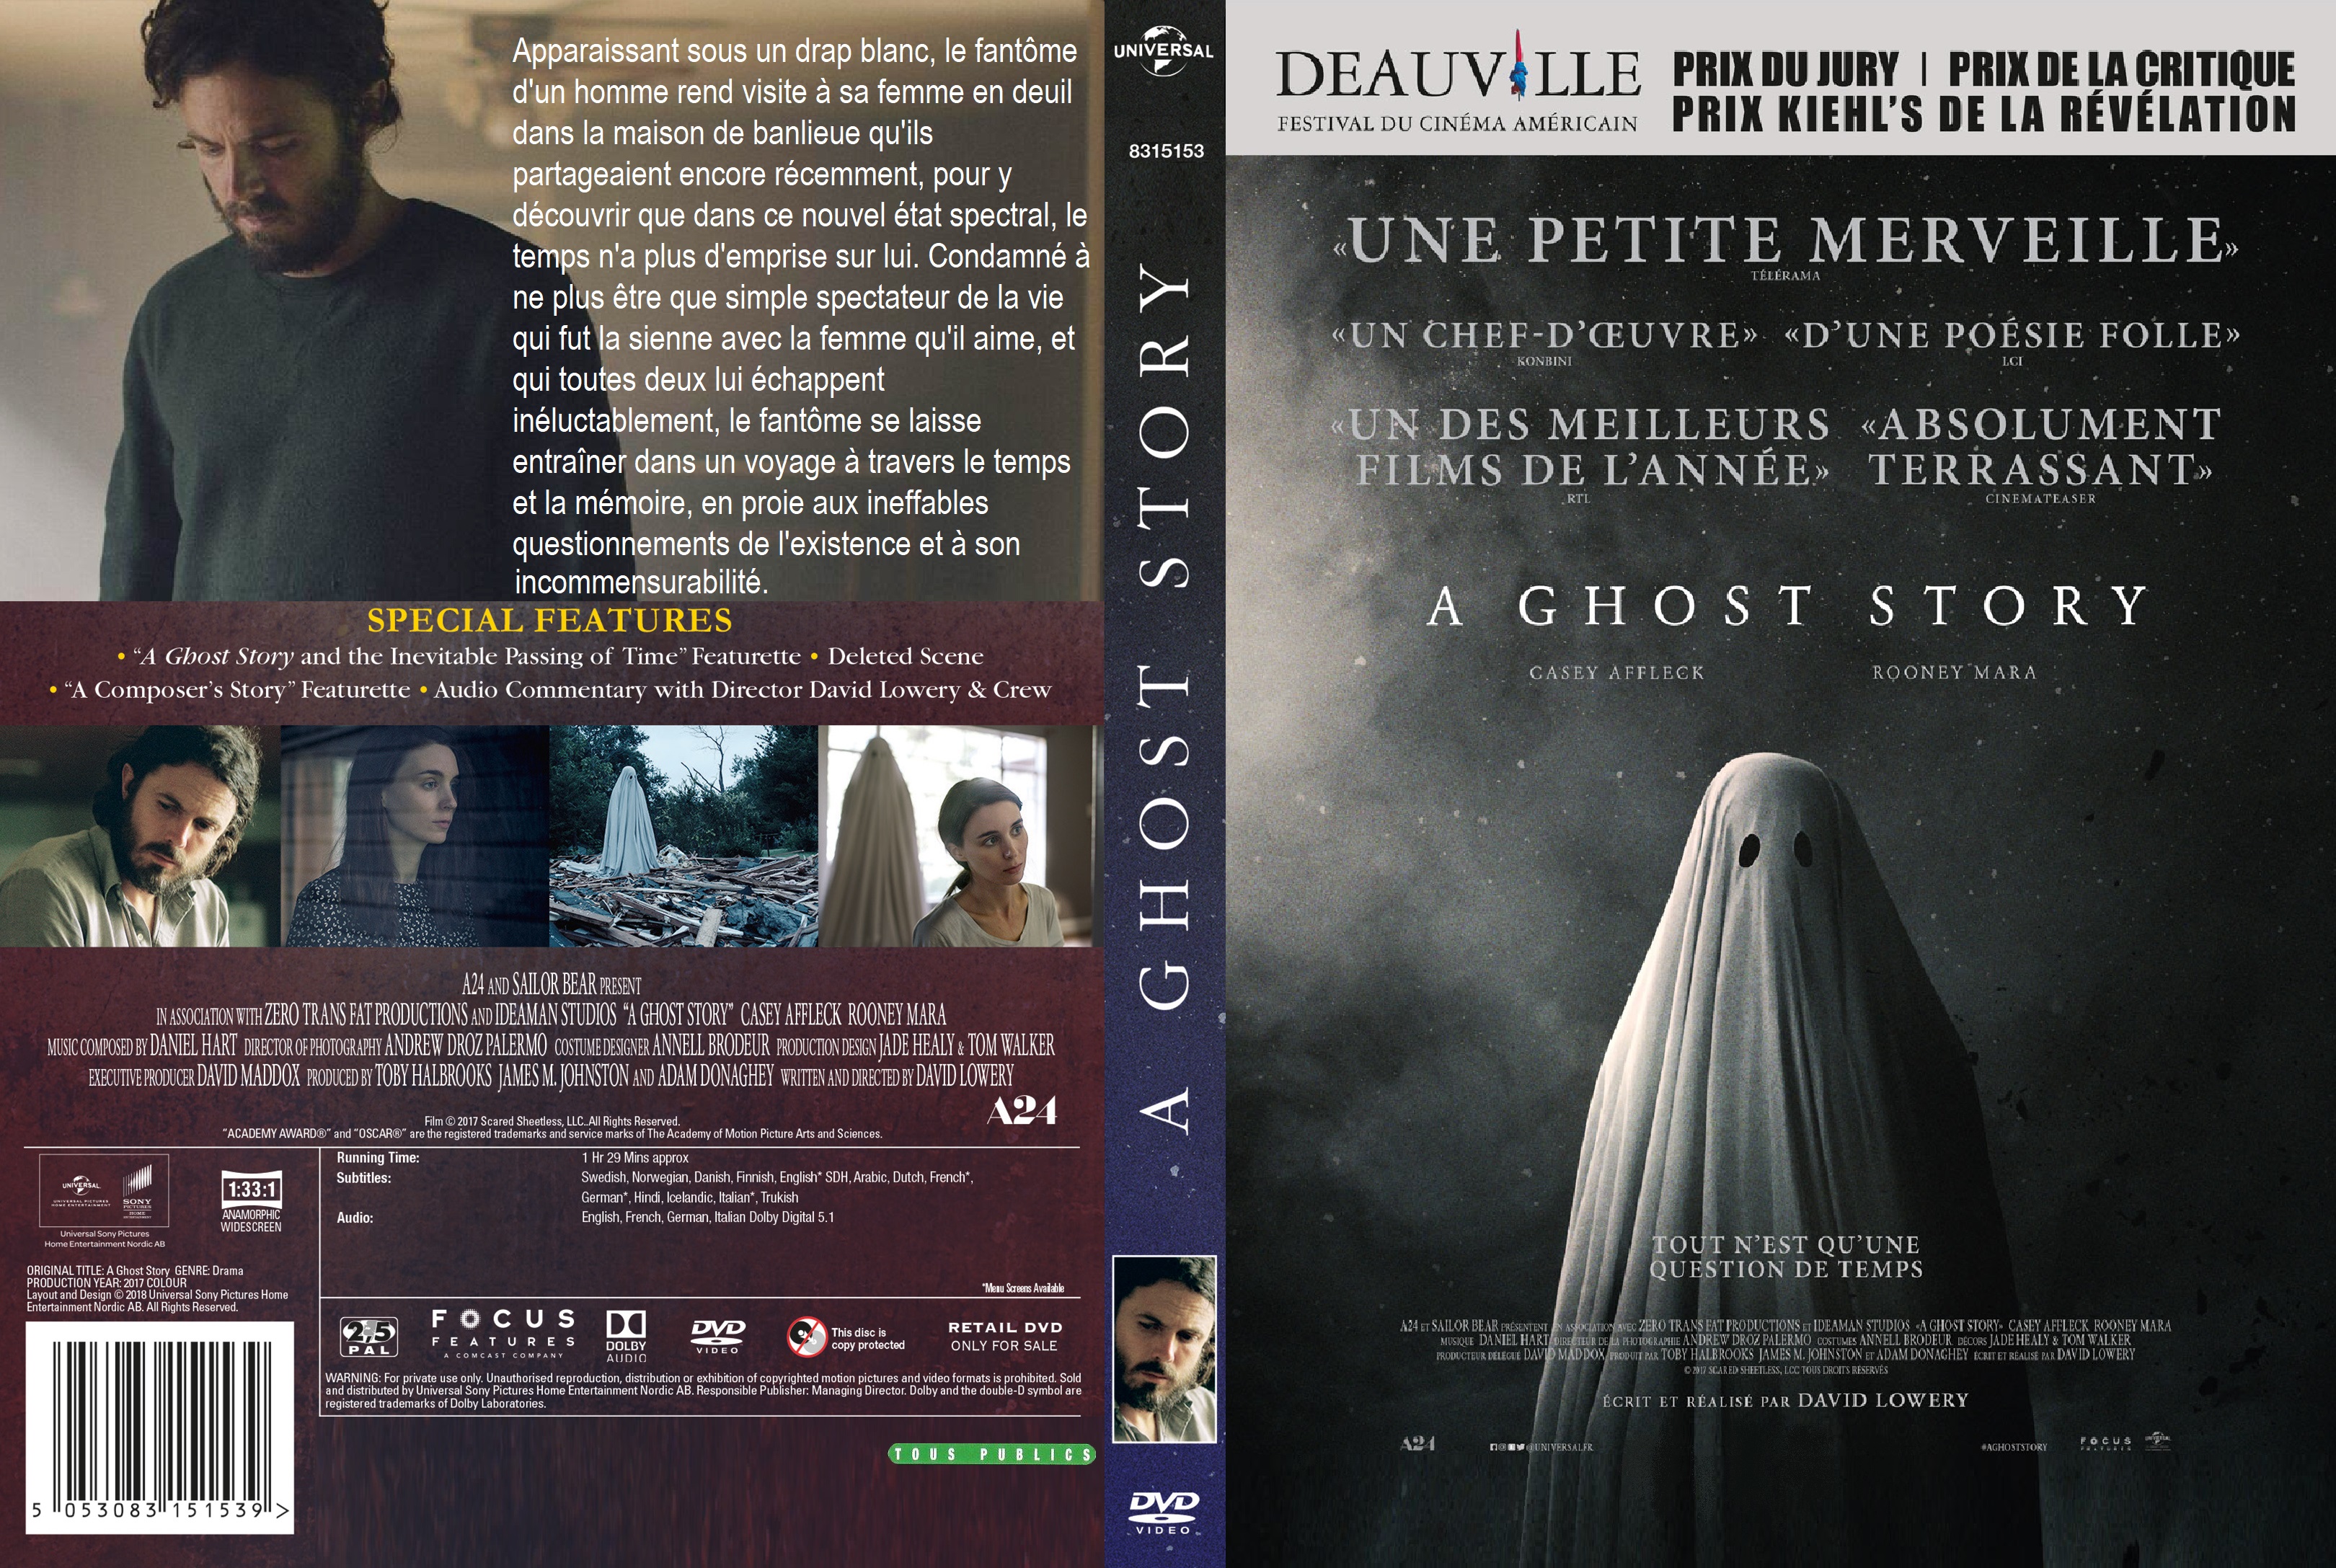 Jaquette DVD A ghost story custom